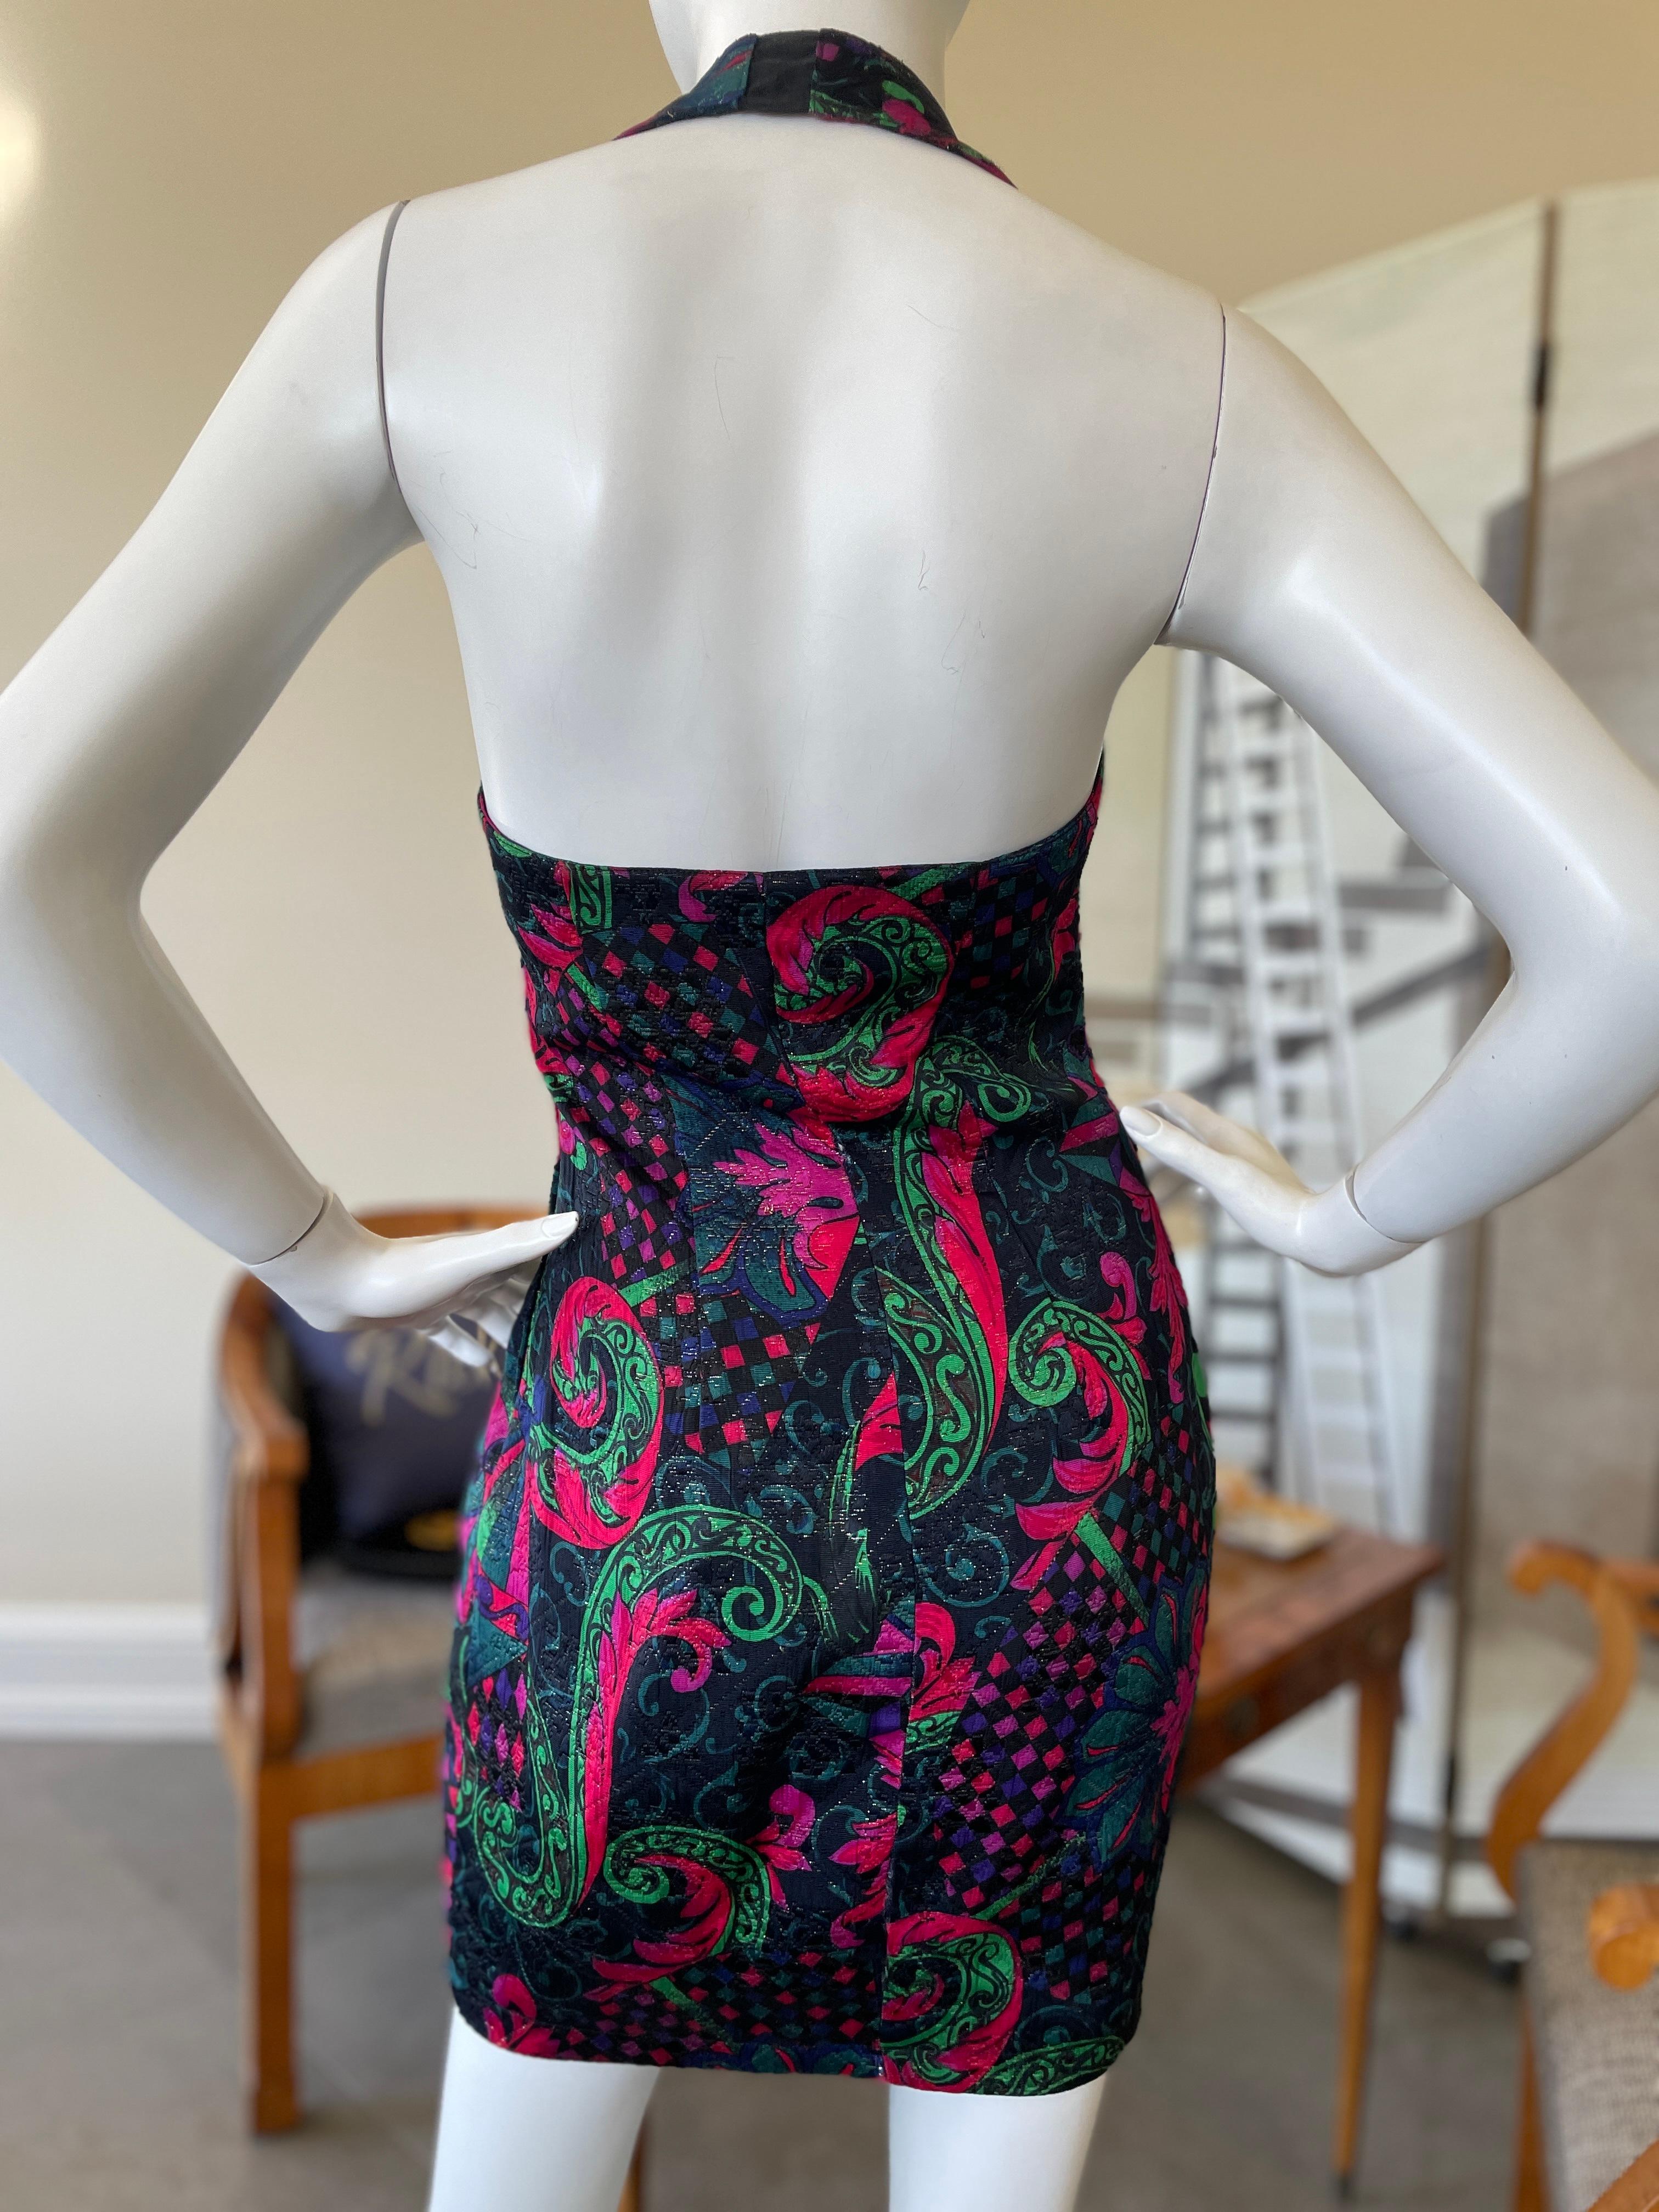 Gianni Versace for Versus Sexy Vintage Baroque Glitter Pattern Dress
Size 42, there is a lot of stretch
Bust 34